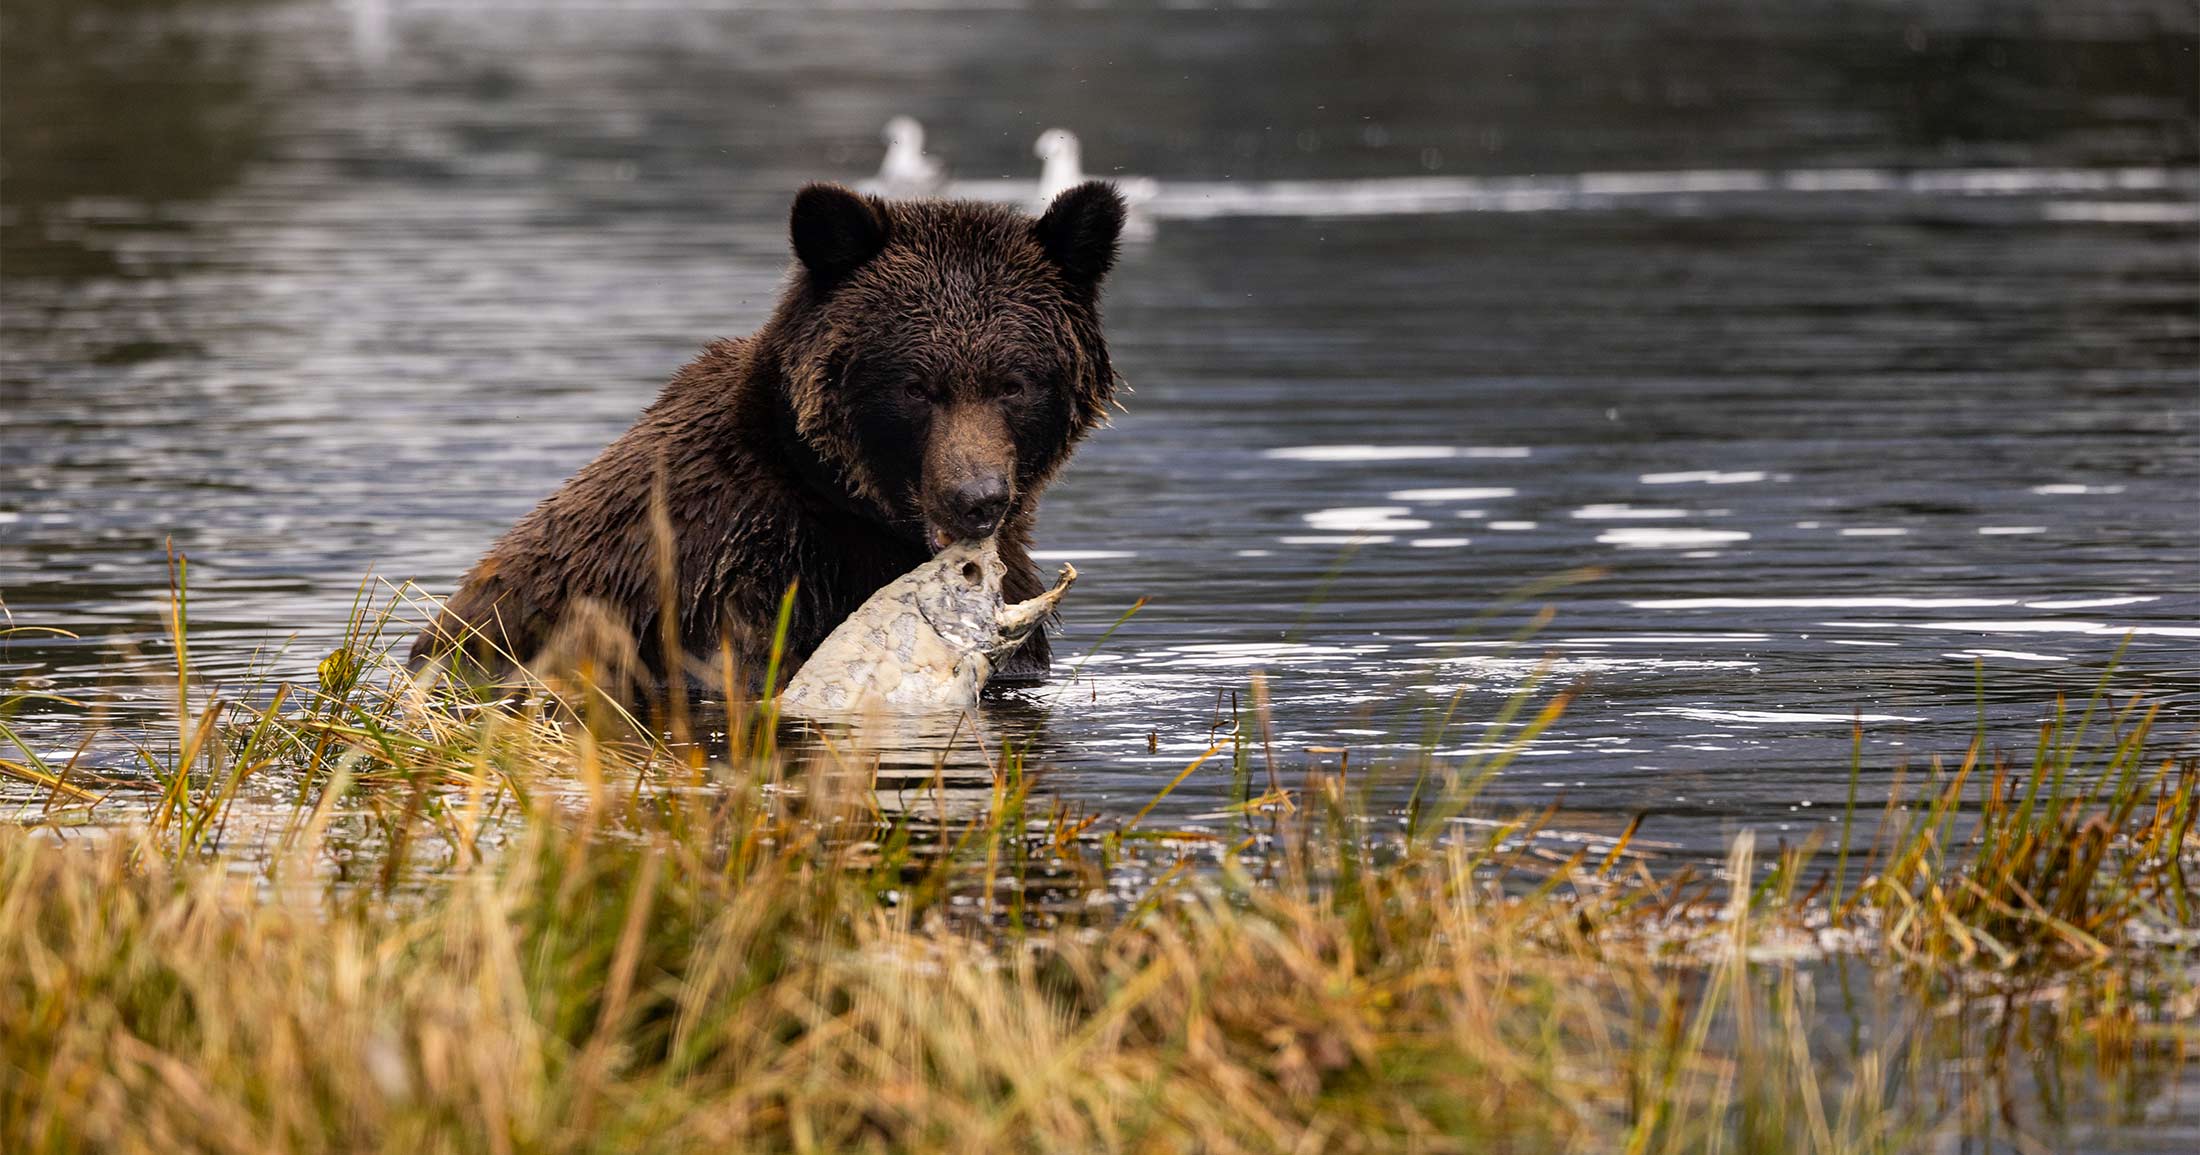 Grizzly bear in a river with a salmon in its mouth.